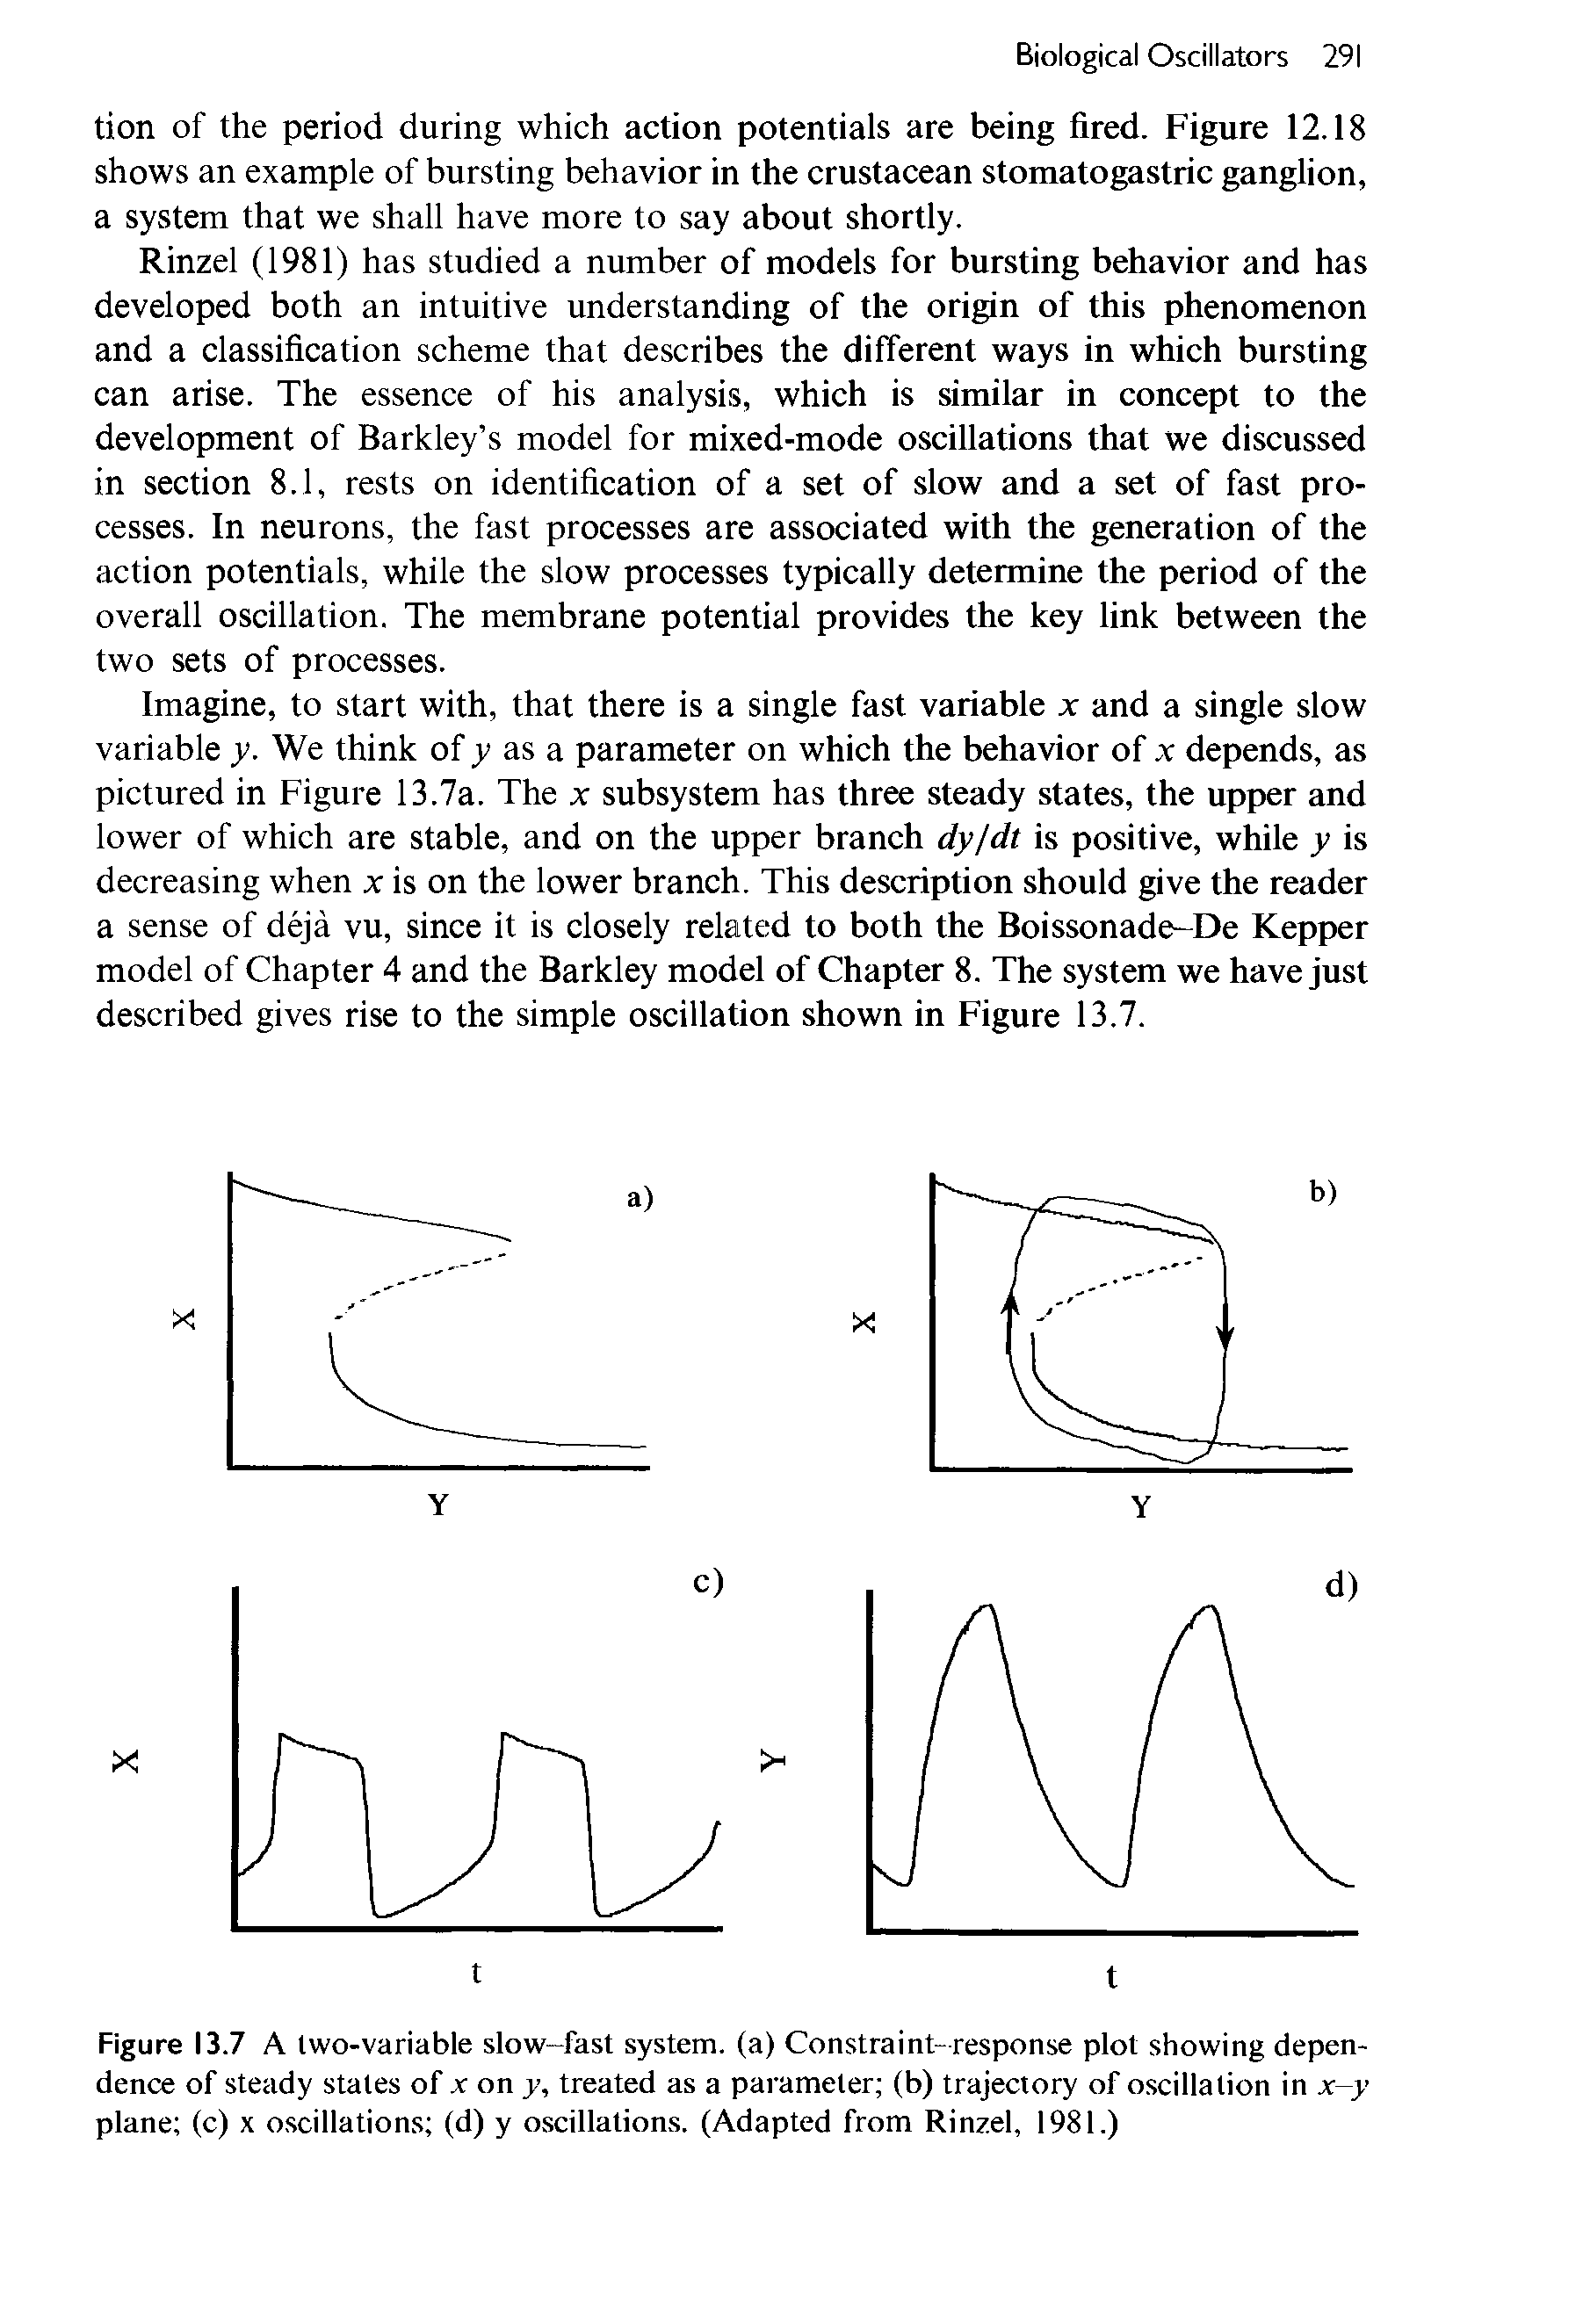 Figure 13.7 A two-variable slow-fast system, (a) Constraint-response plot showing dependence of steady states of x on y, treated as a parameter (b) trajectory of oscillation in x-y plane (c) x oscillations (d) y oscillations. (Adapted from Rinzel, 1981.)...